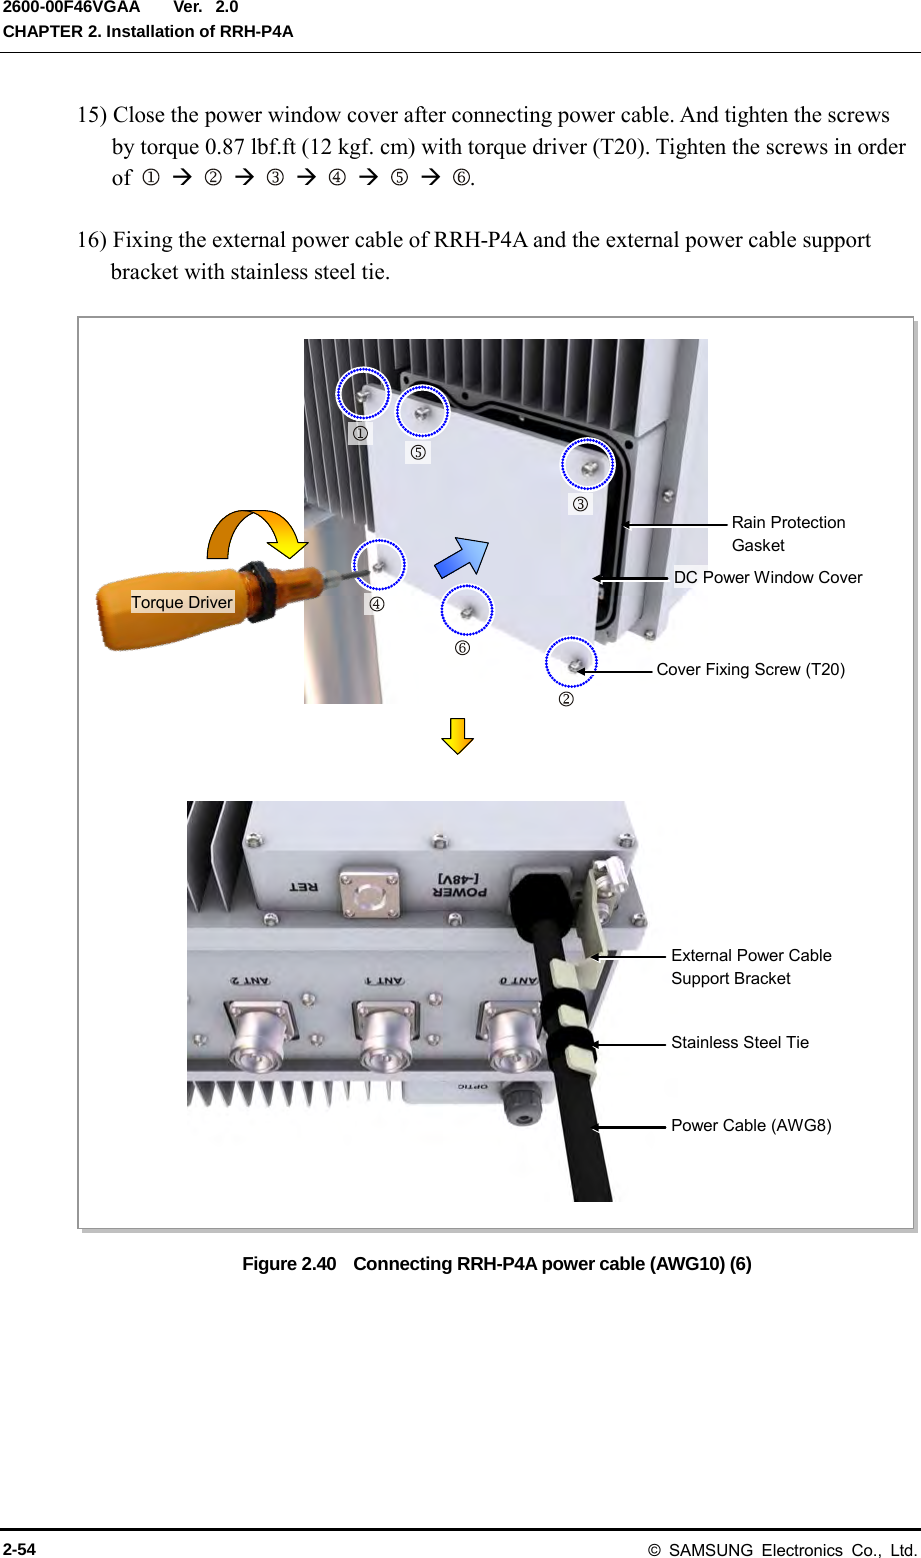  Ver.  CHAPTER 2. Installation of RRH-P4A 2600-00F46VGAA 2.0 15) Close the power window cover after connecting power cable. And tighten the screws by torque 0.87 lbf.ft (12 kgf. cm) with torque driver (T20). Tighten the screws in order of                     .  16) Fixing the external power cable of RRH-P4A and the external power cable support bracket with stainless steel tie.  Figure 2.40    Connecting RRH-P4A power cable (AWG10) (6)   Cover Fixing Screw (T20) DC Power Window Cover Torque Driver External Power Cable Support Bracket Stainless Steel Tie Power Cable (AWG8) Rain Protection Gasket       2-54 © SAMSUNG Electronics Co., Ltd. 